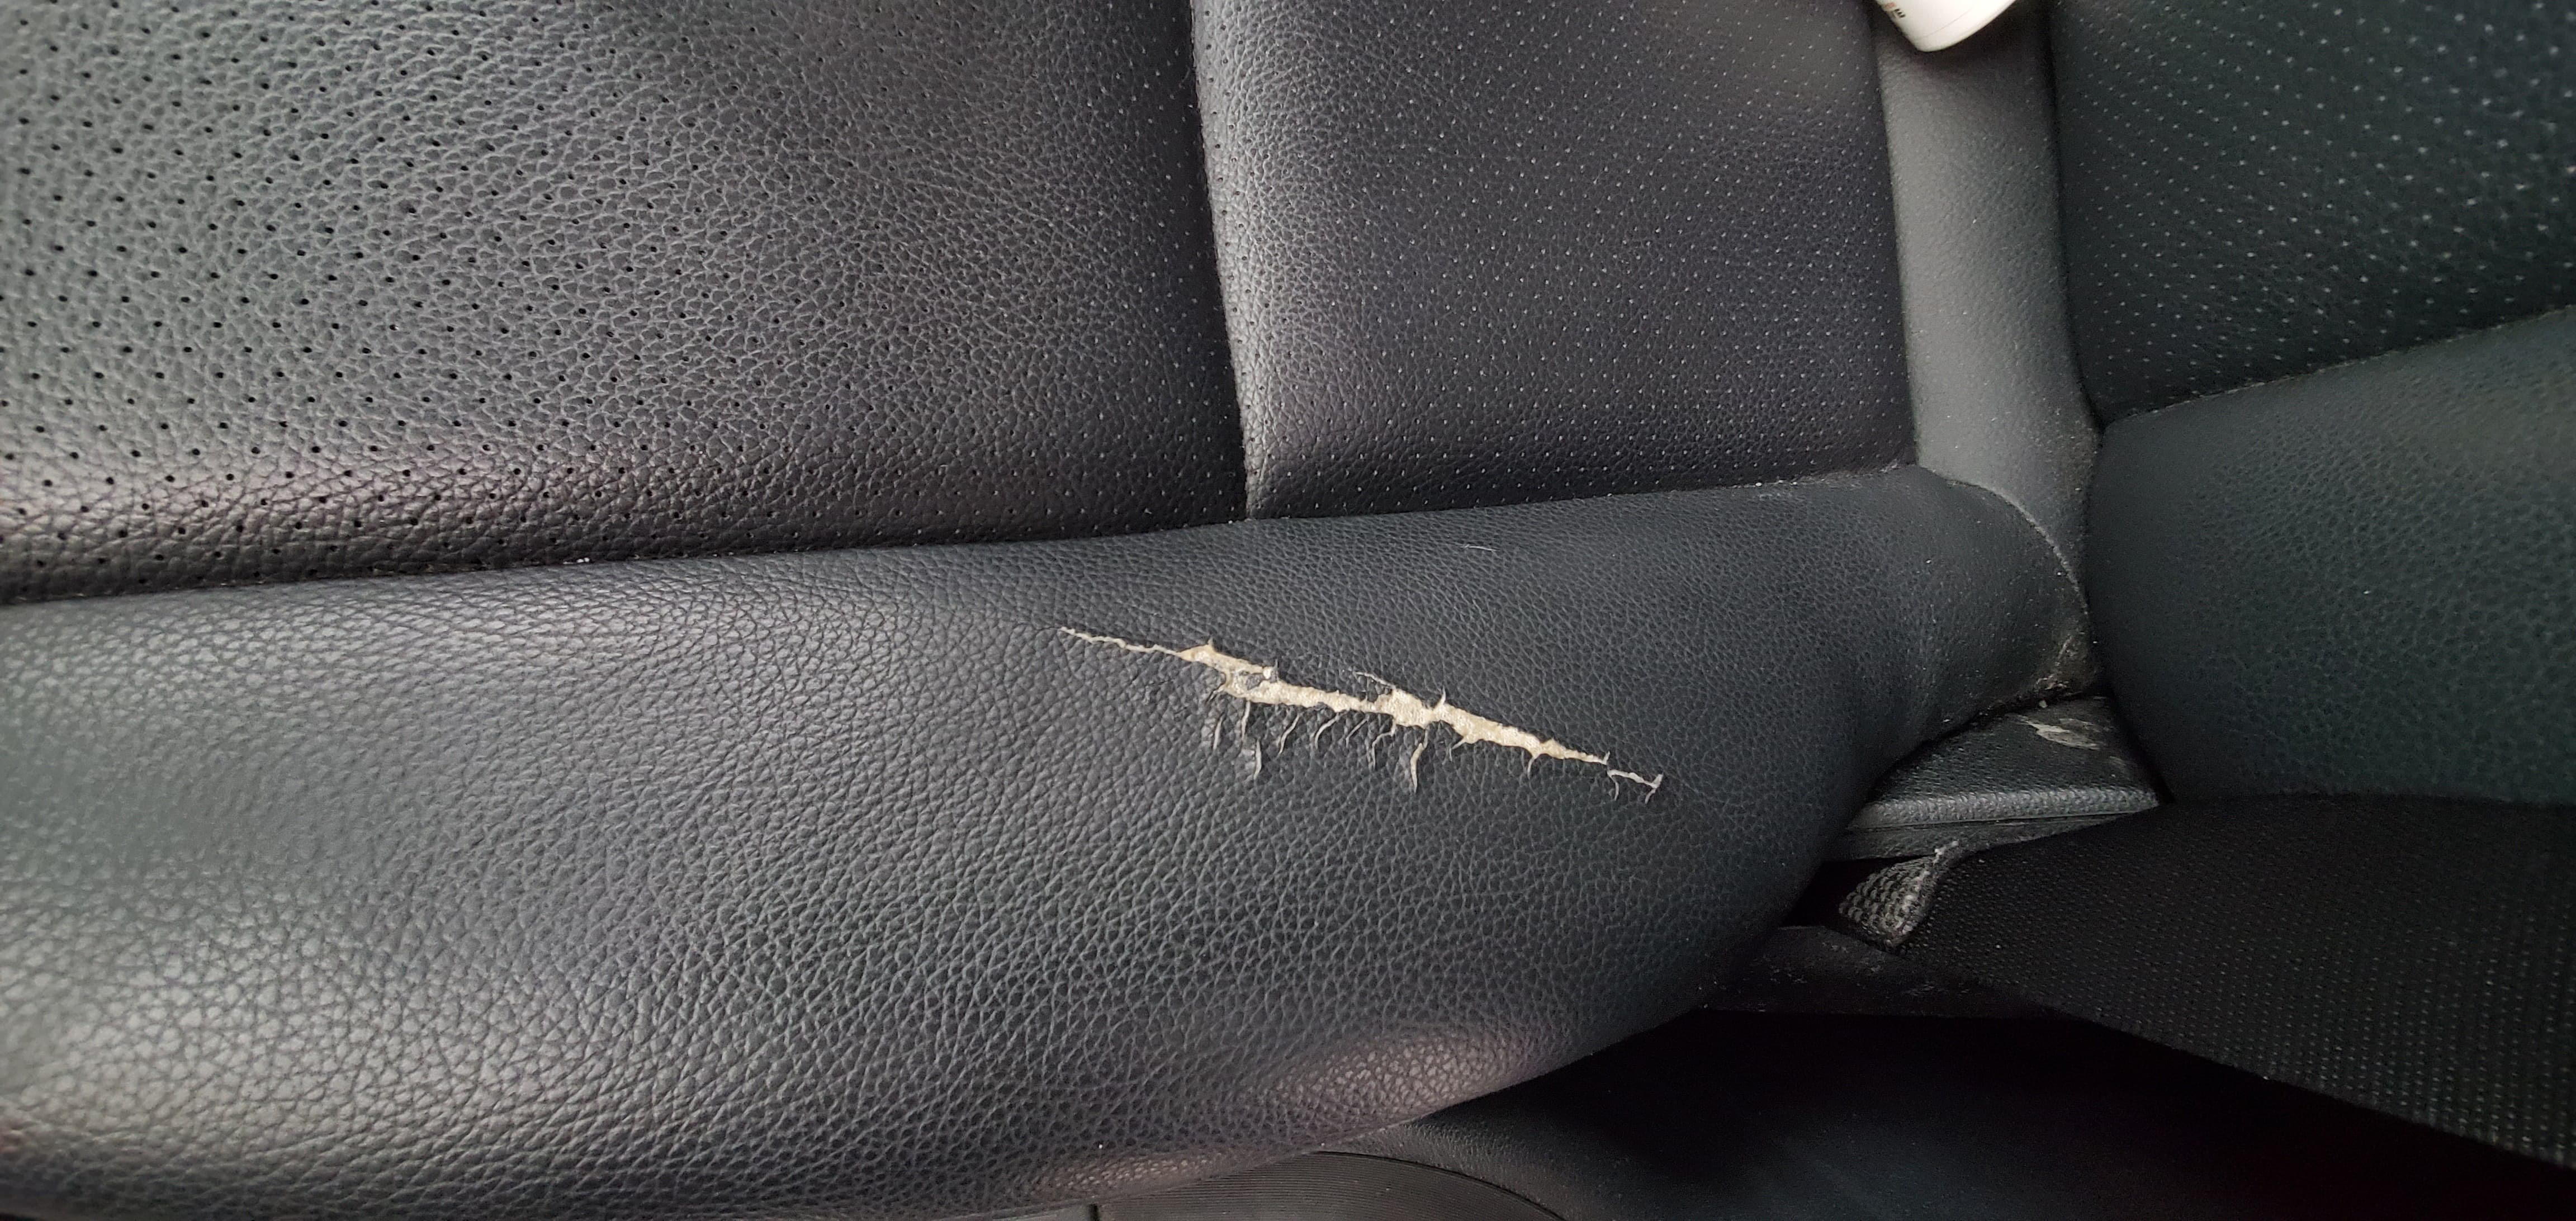 How To Repair A Leather Car Seat - How To Fix Rip In Leather Car Seat